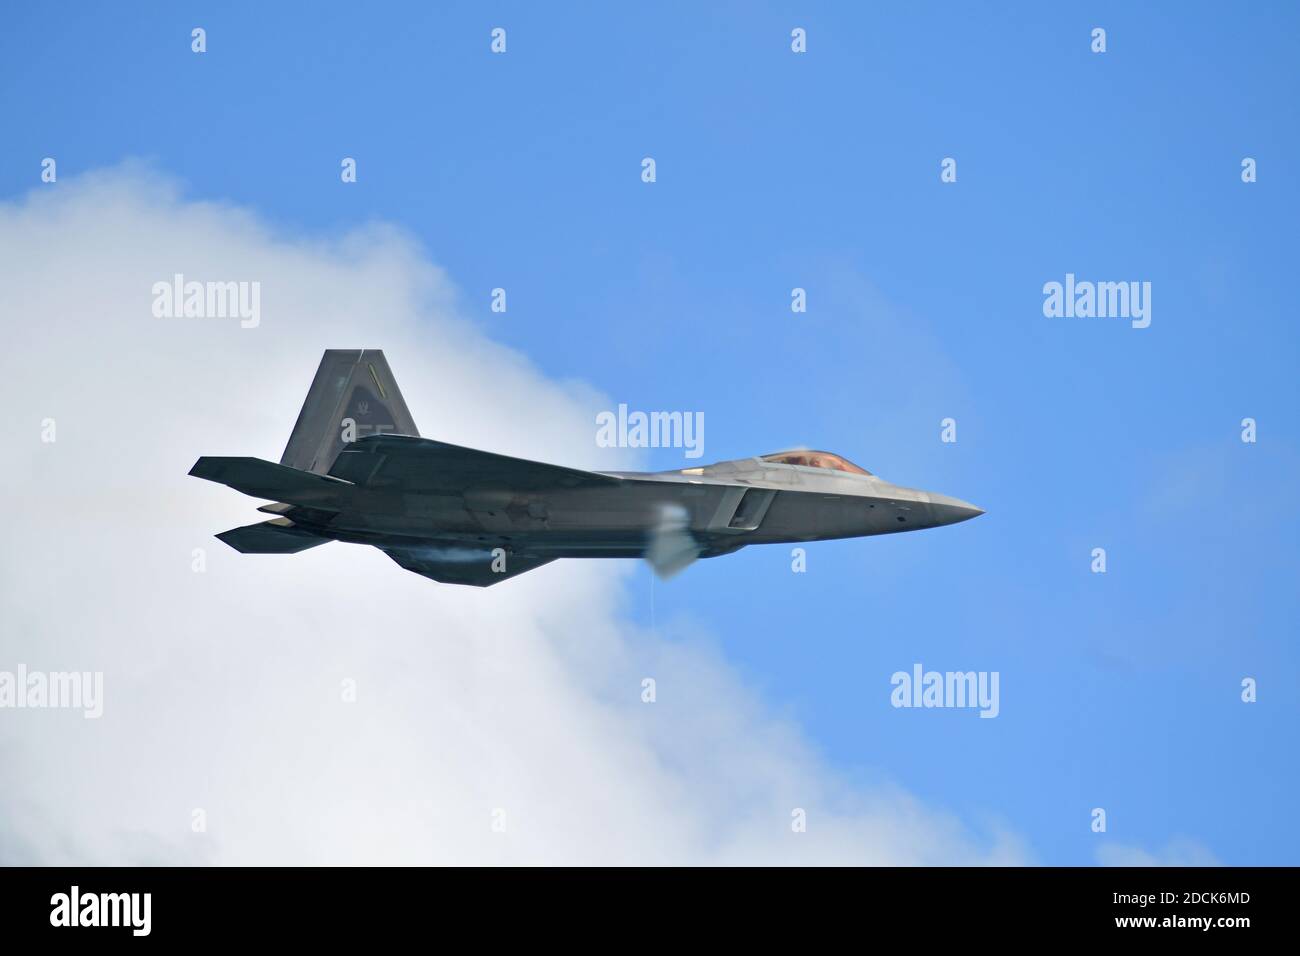 FORT LAUDERDALE, FL - NOVEMBER 21: F-22 Raptor Demo Team performs in the Fort Lauderdale Air Show on November 21, 2020 in Fort Lauderdale, Florida People: F-22 Raptor Demo Team Credit: Storms Media Group/Alamy Live News Stock Photo